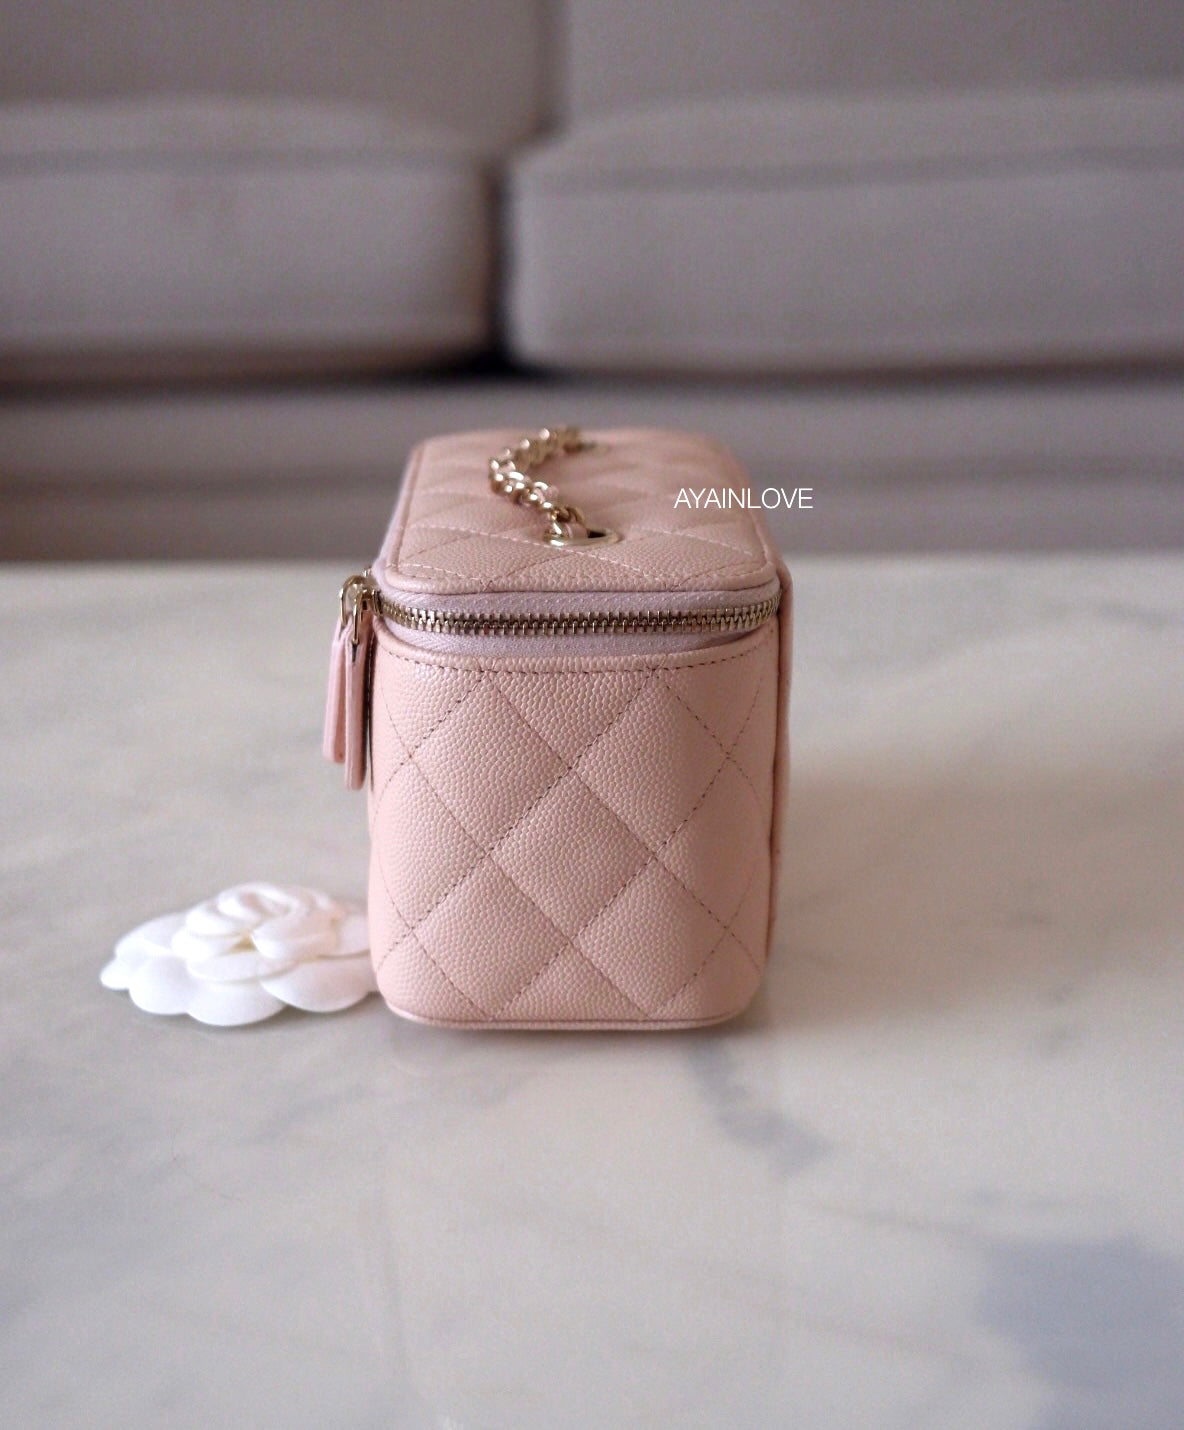 Chanel Peach Quilted Caviar Mini Vanity Case With Chain And Small